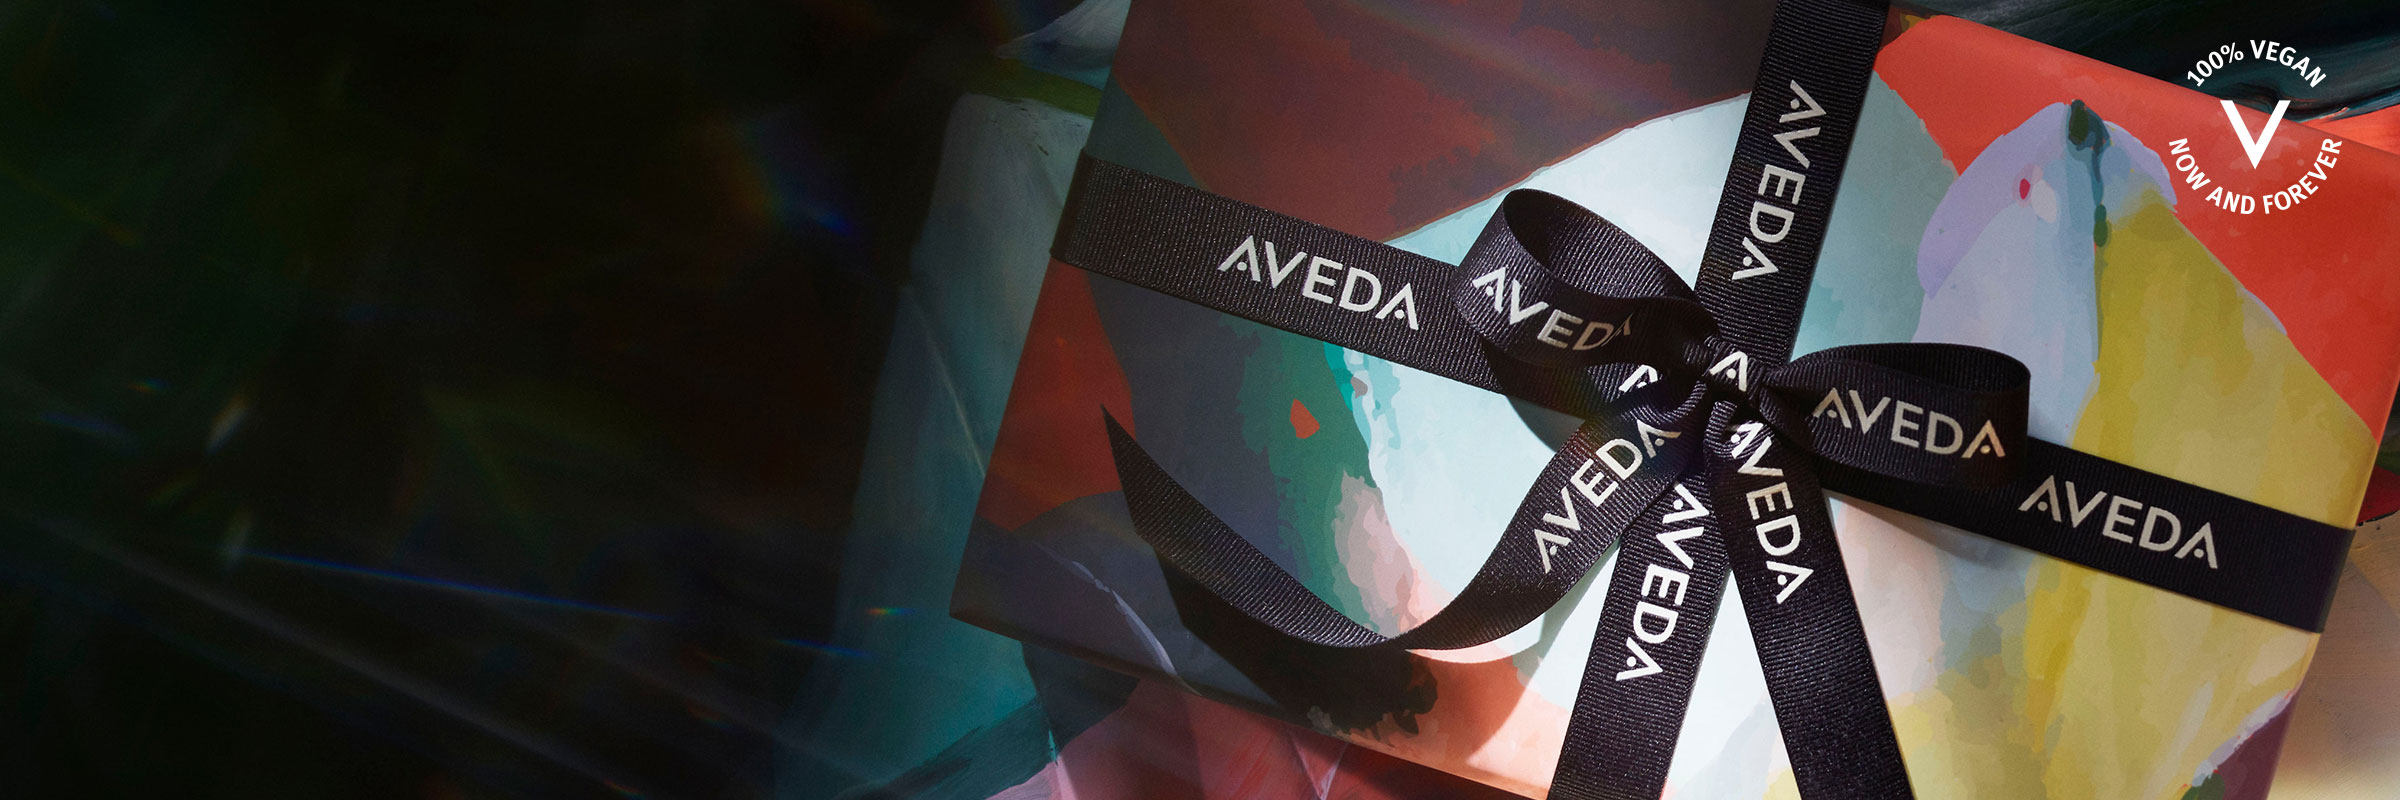 Shop Aveda limited-edition gift sets